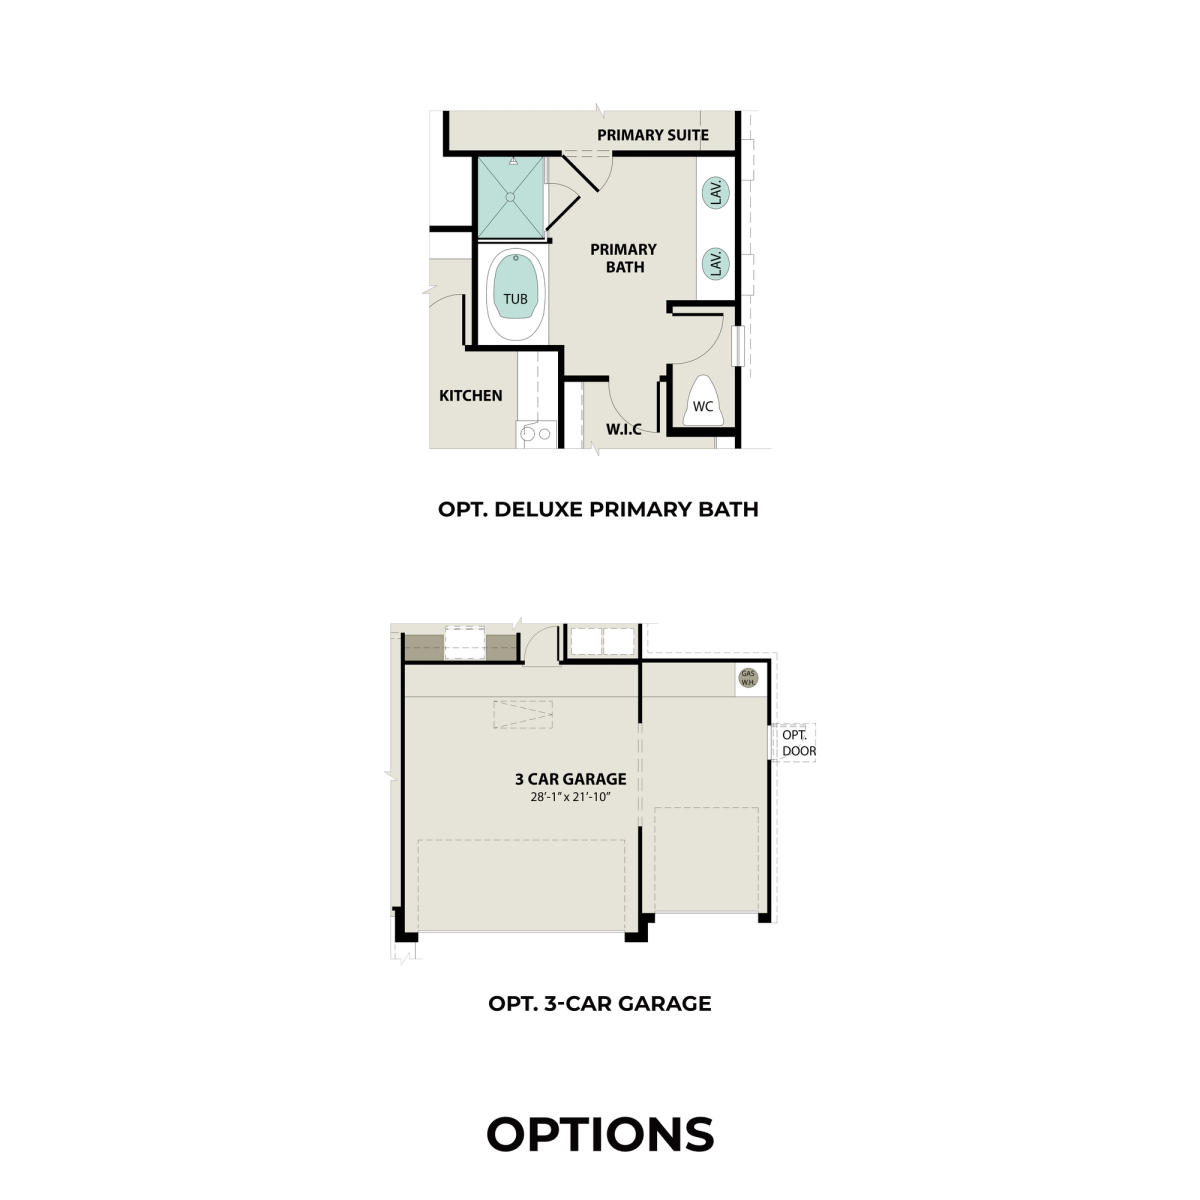 2 - The Laguna A buildable floor plan layout in Davidson Homes' Enclave at Newport community.